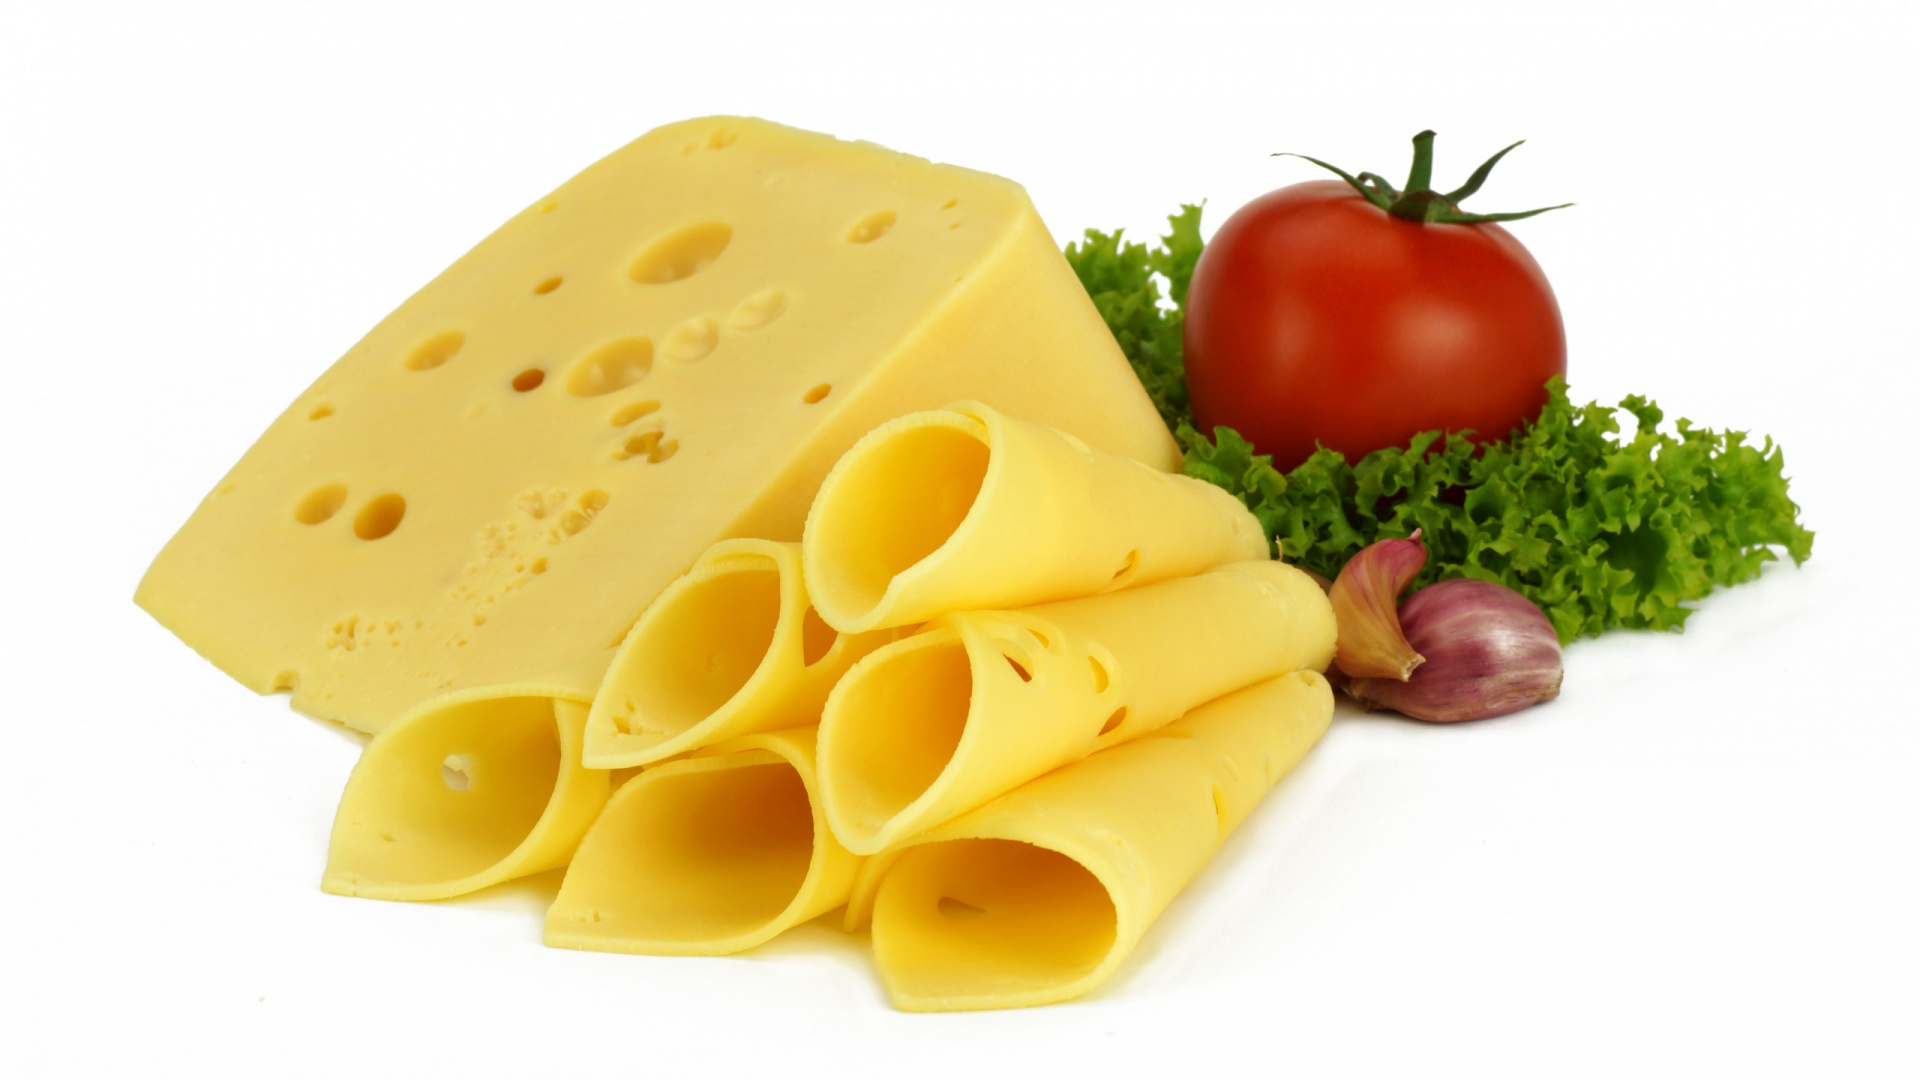 Sliced Cheese and Green Vegetable. Wallpaper in 1920x1080 Resolution